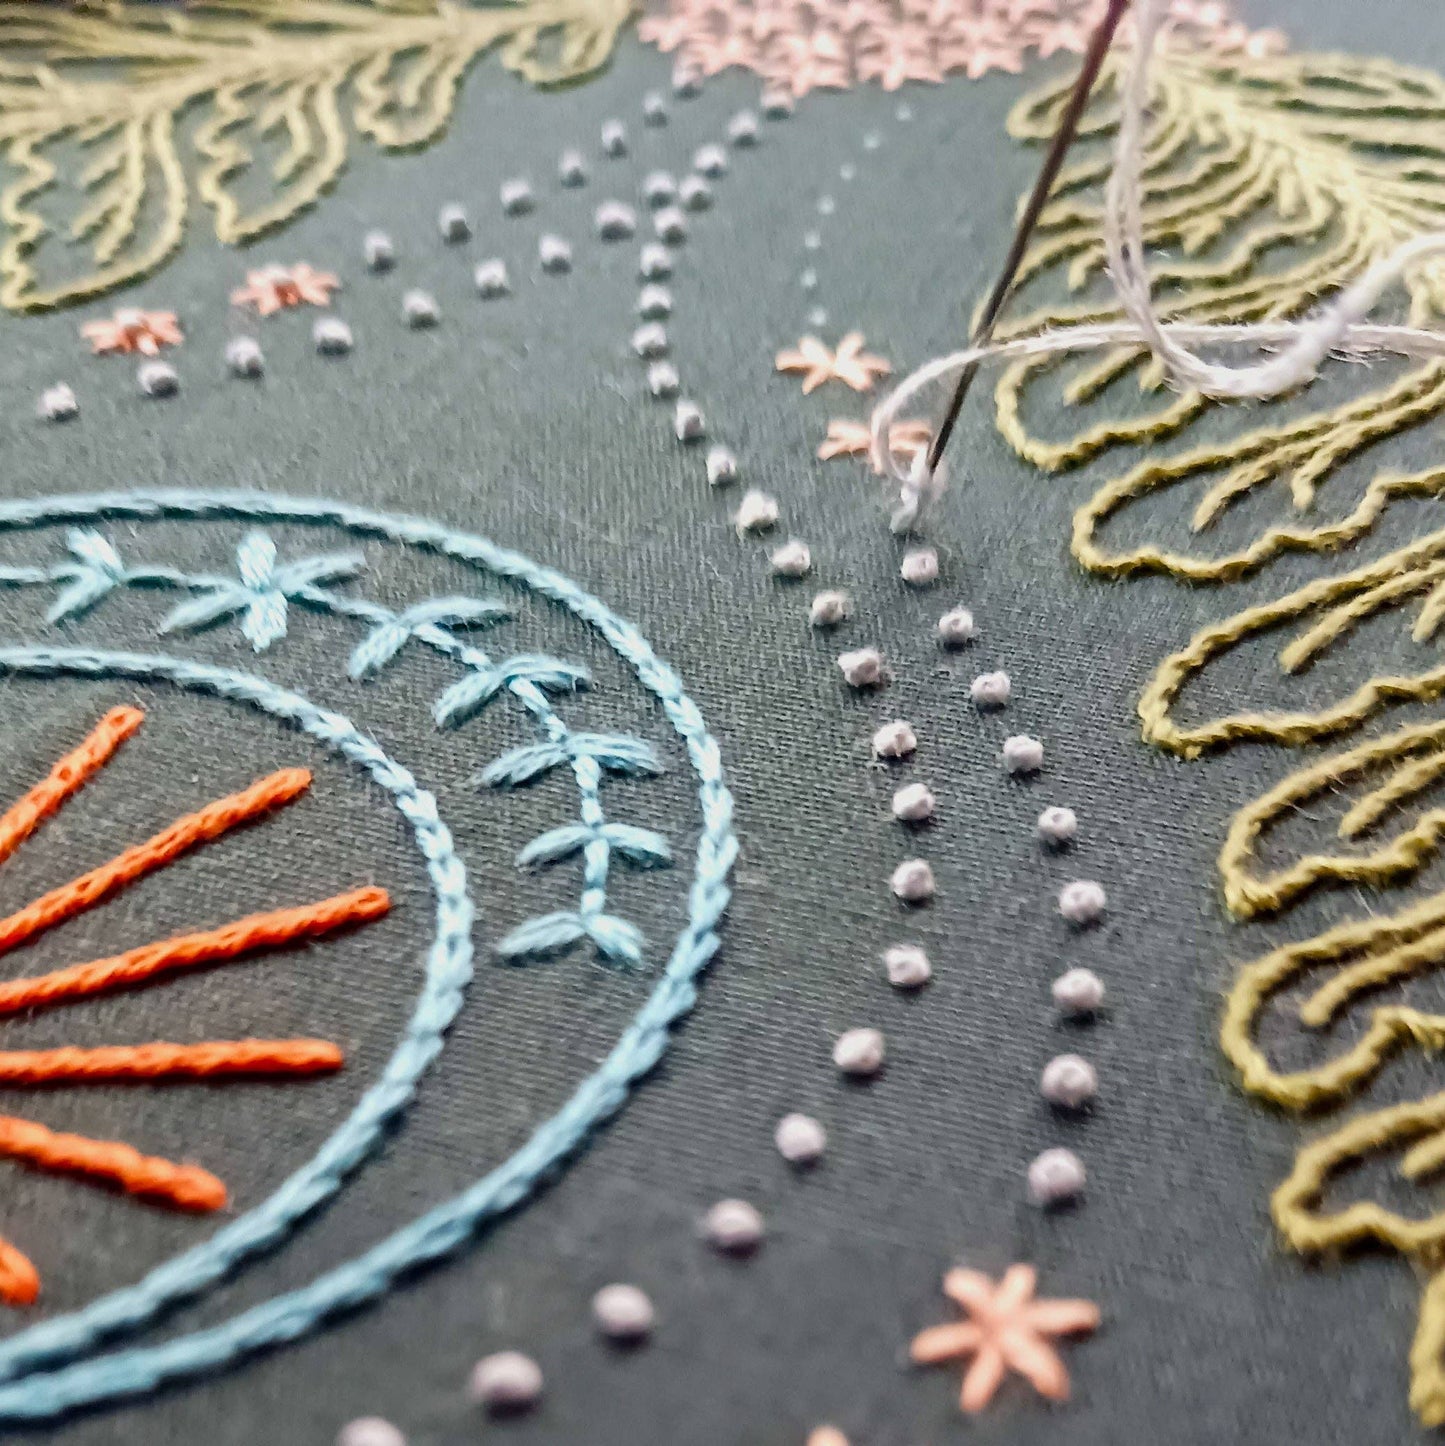 blue moon embroidery kit